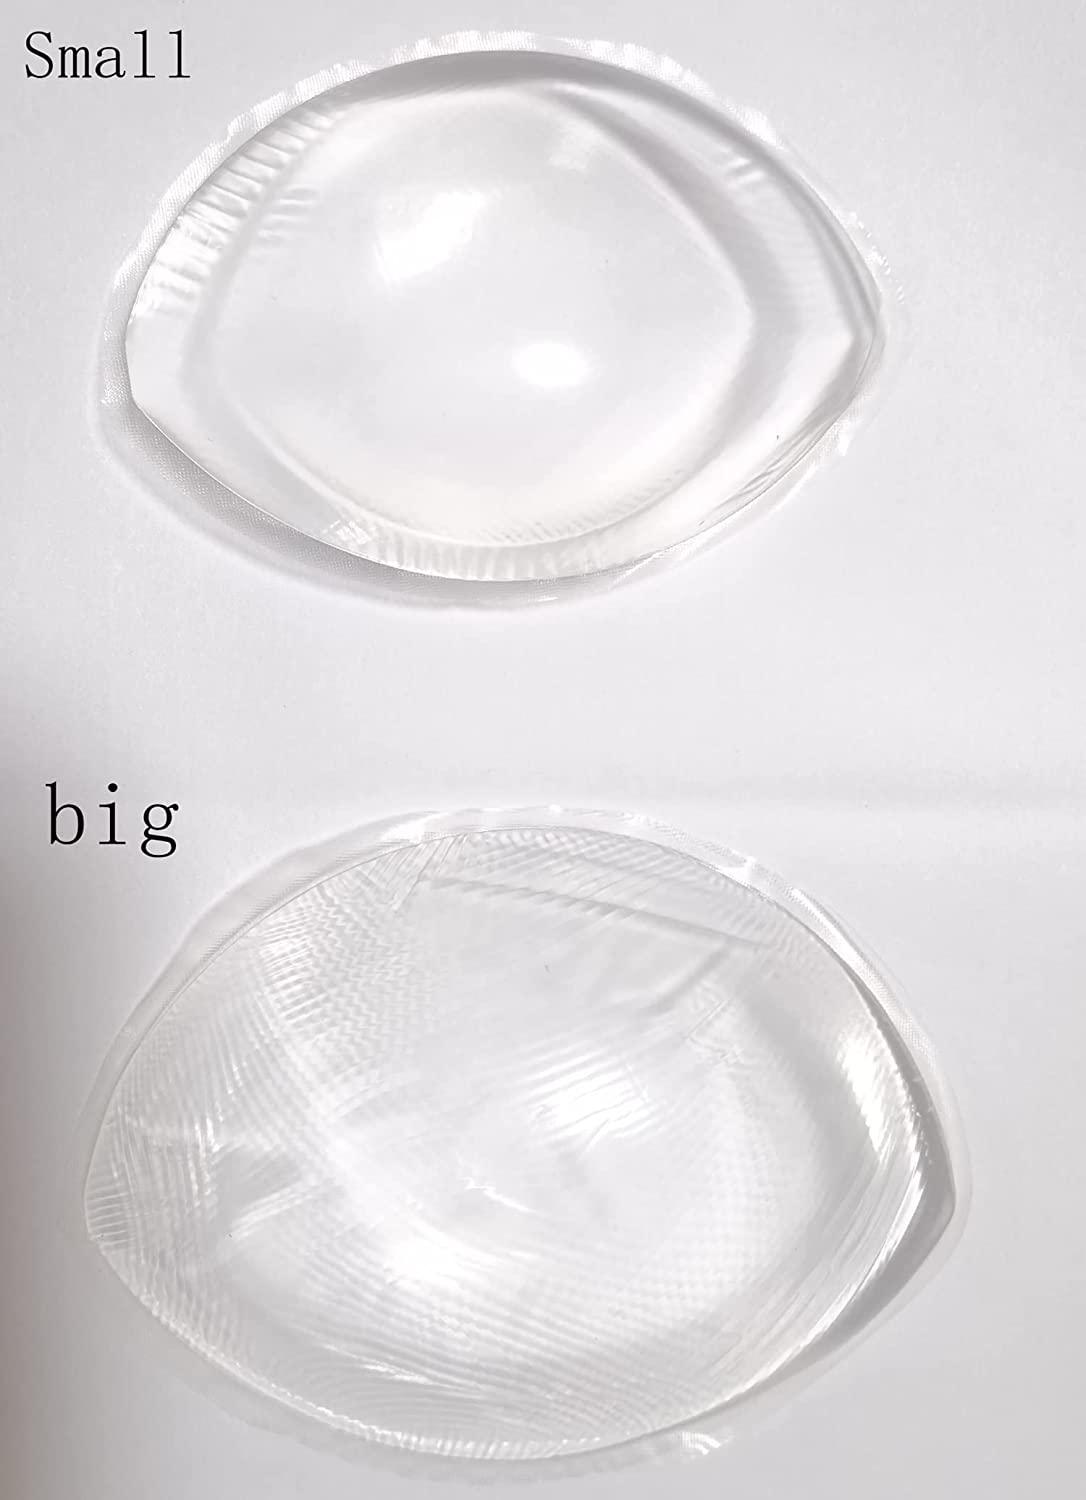 Silicone Bra Inserts, Clear V-shaped Breast Enhancers Waterproof Bra Push  Up Pads For Bikini Swimsuit